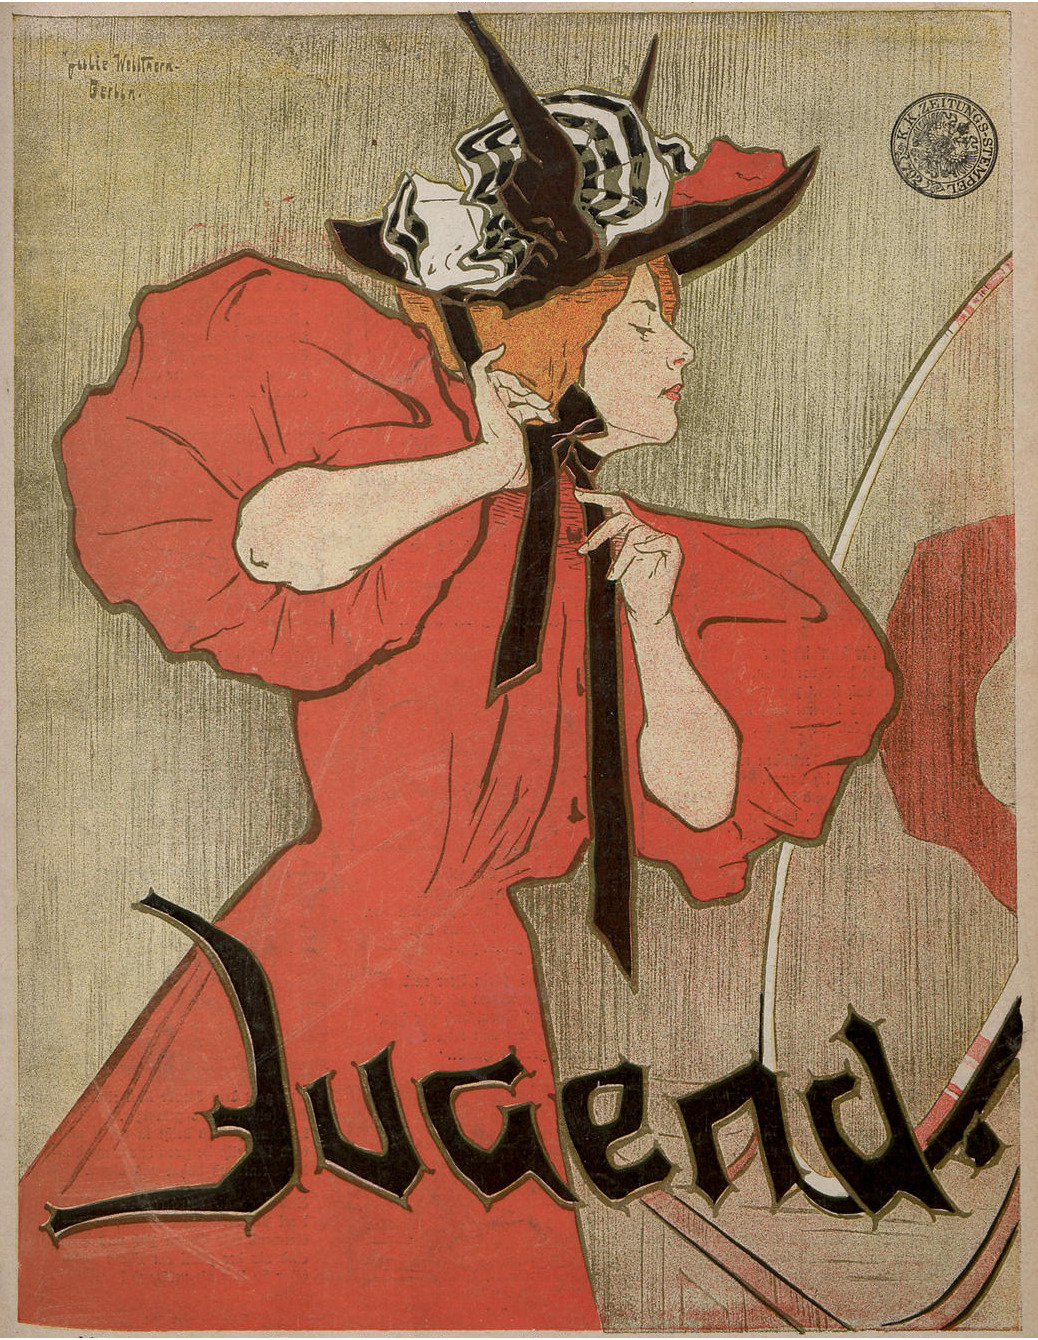 Jugend magazine cover (Issue 47) by Julie Wolfthorn, 1897. Julie Wolfthorn (1864-1944) was a German-Jewish female painter who created many illustrations for Jugend and was a well known and established portrait painter in Germany. Since the art schools did not accept women at that time, she travelled to Paris in the 1890′s to learn painting techniques and skills. She later became involved with the Berlin Secession and became a prominent member of it. Among her clients and friends were many female artists and important figures in society. Her life did not end well though. She later died in her 70′s at a camp established by the SS for Jewish citizens. She was said to have continued her drawing despite the horrific conditions there.(Source: berlin-woman, wikipedia)